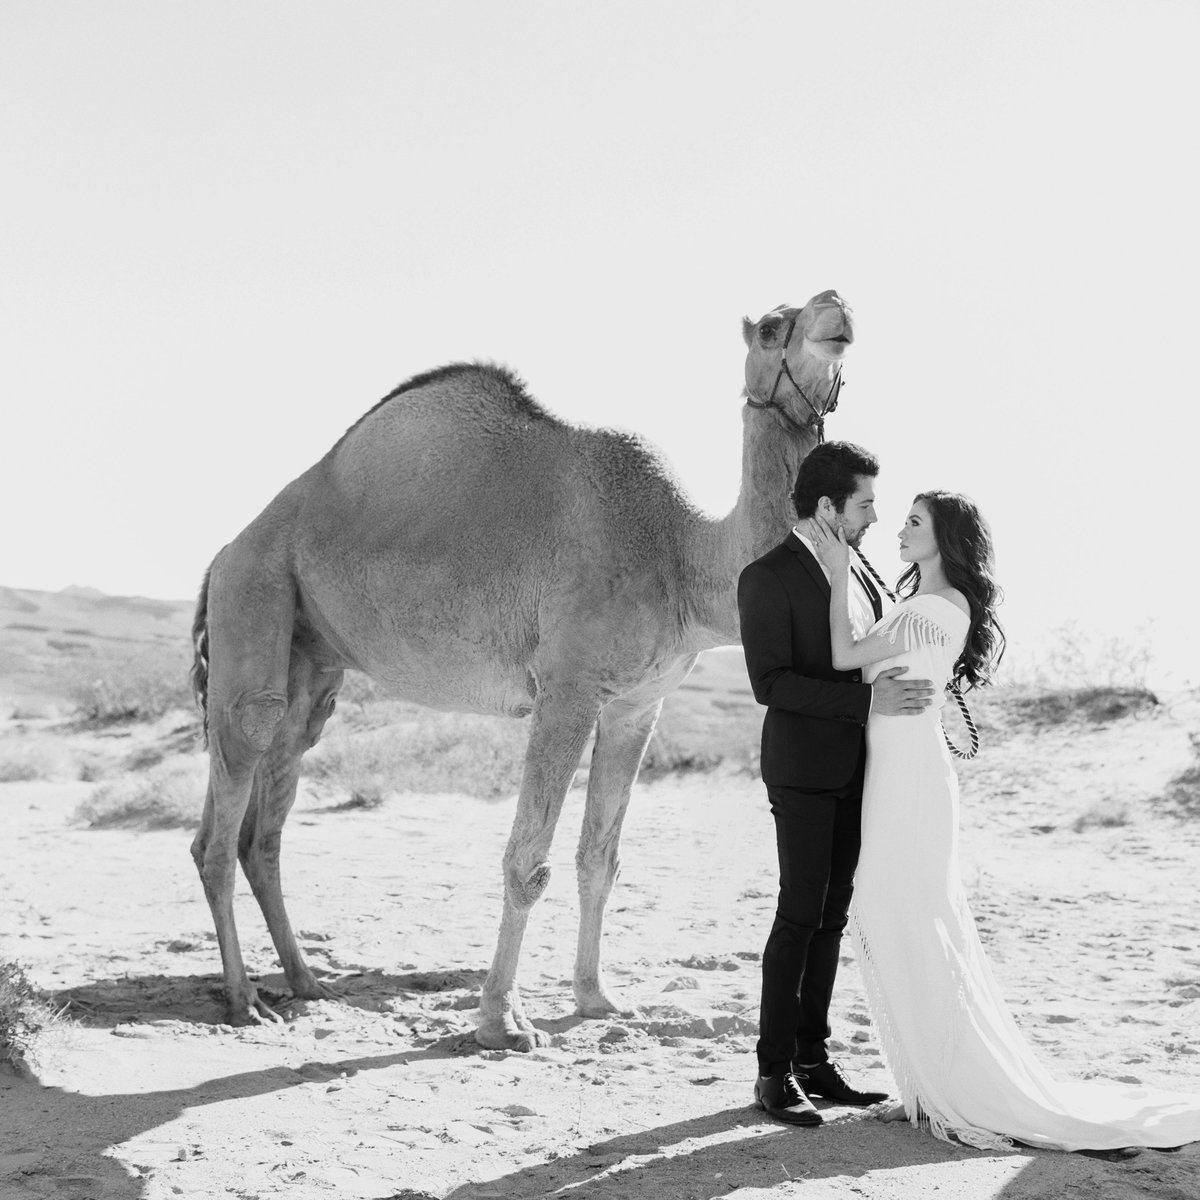 philip-casey-photography-desert-camel-editorial-session-10